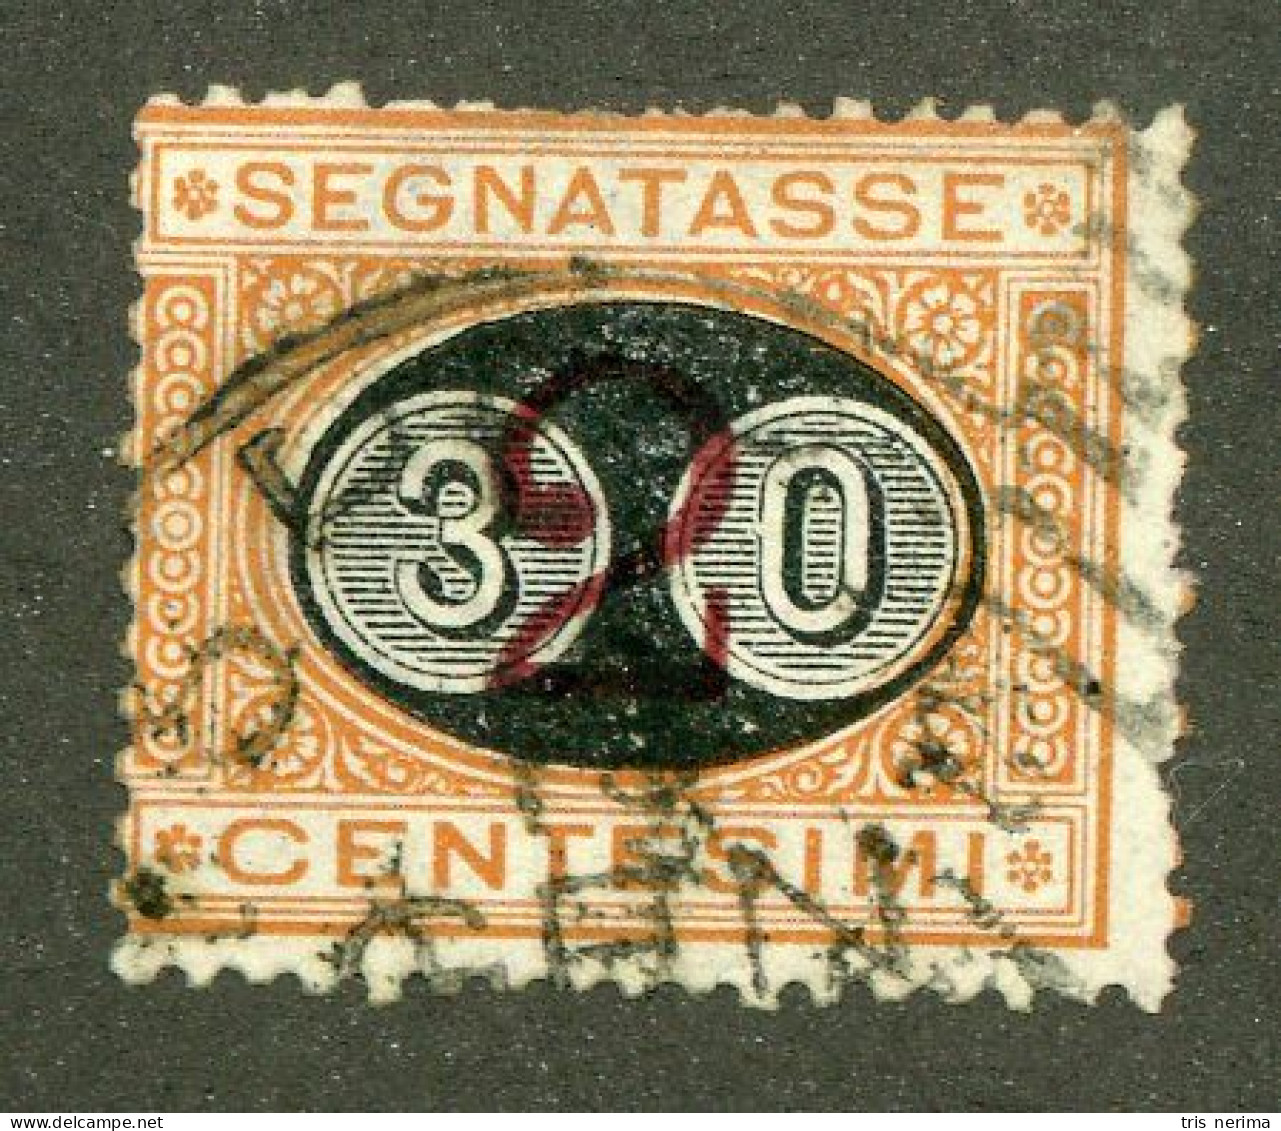 586 Italy 1890 Scott #J27 Used (Lower Bids 20% Off) - Postage Due